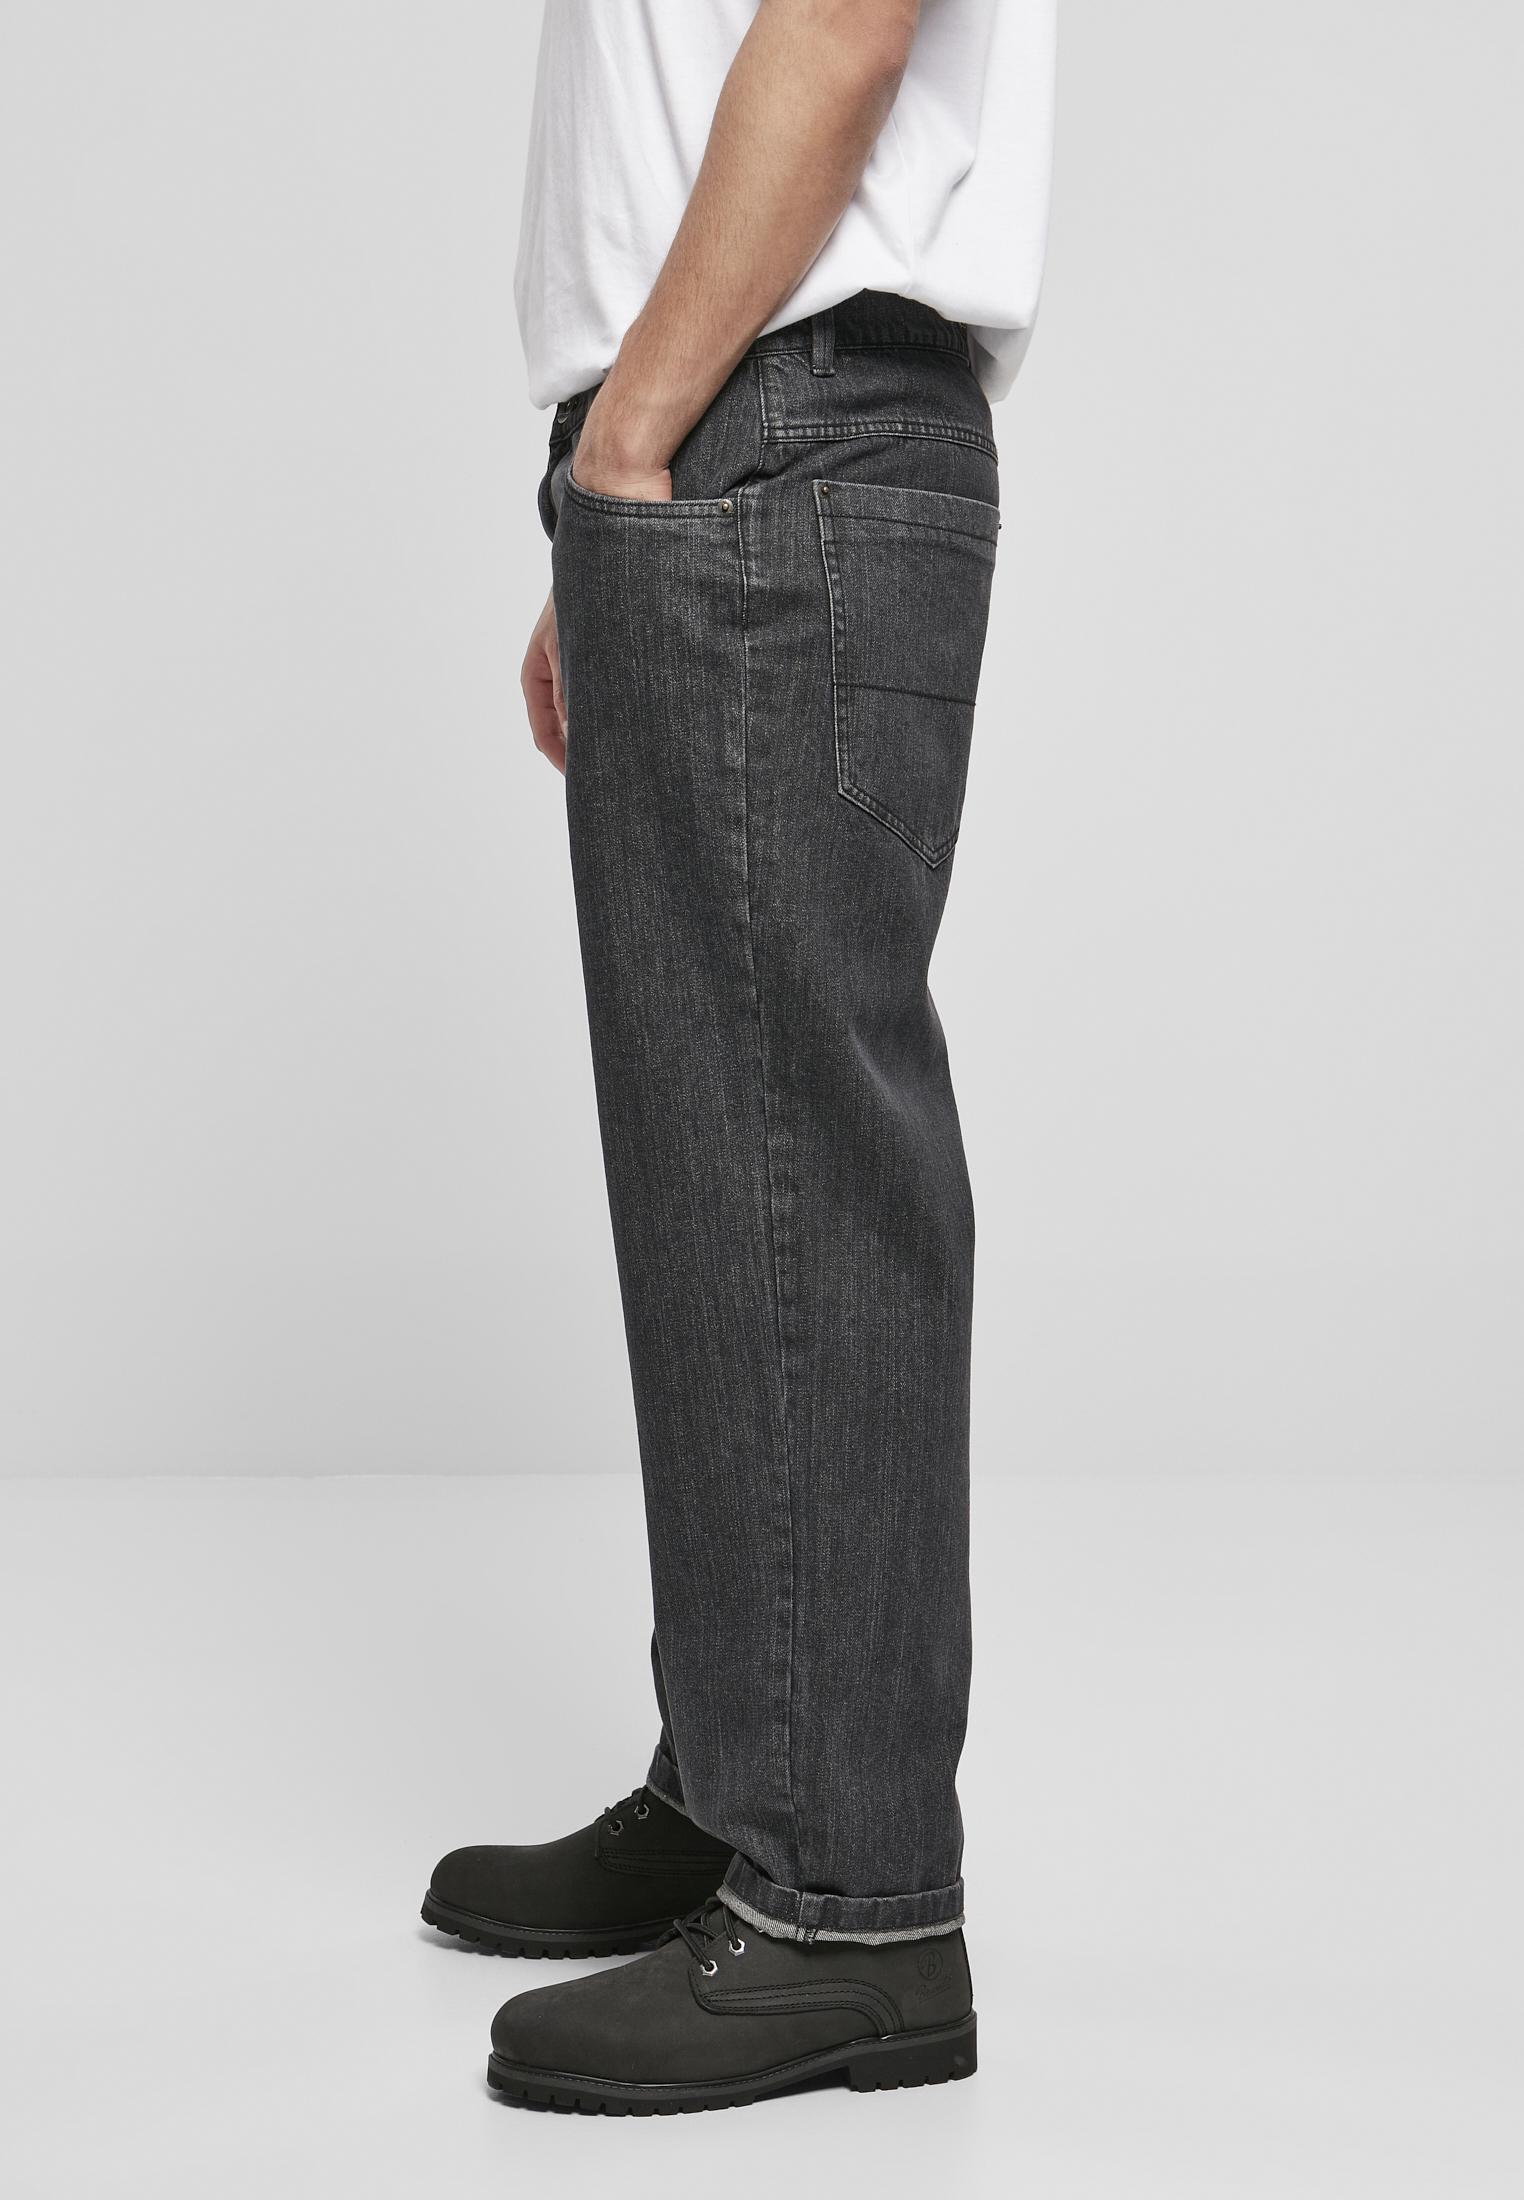 Saisonware Southpole Embossed Denim in Farbe black washed